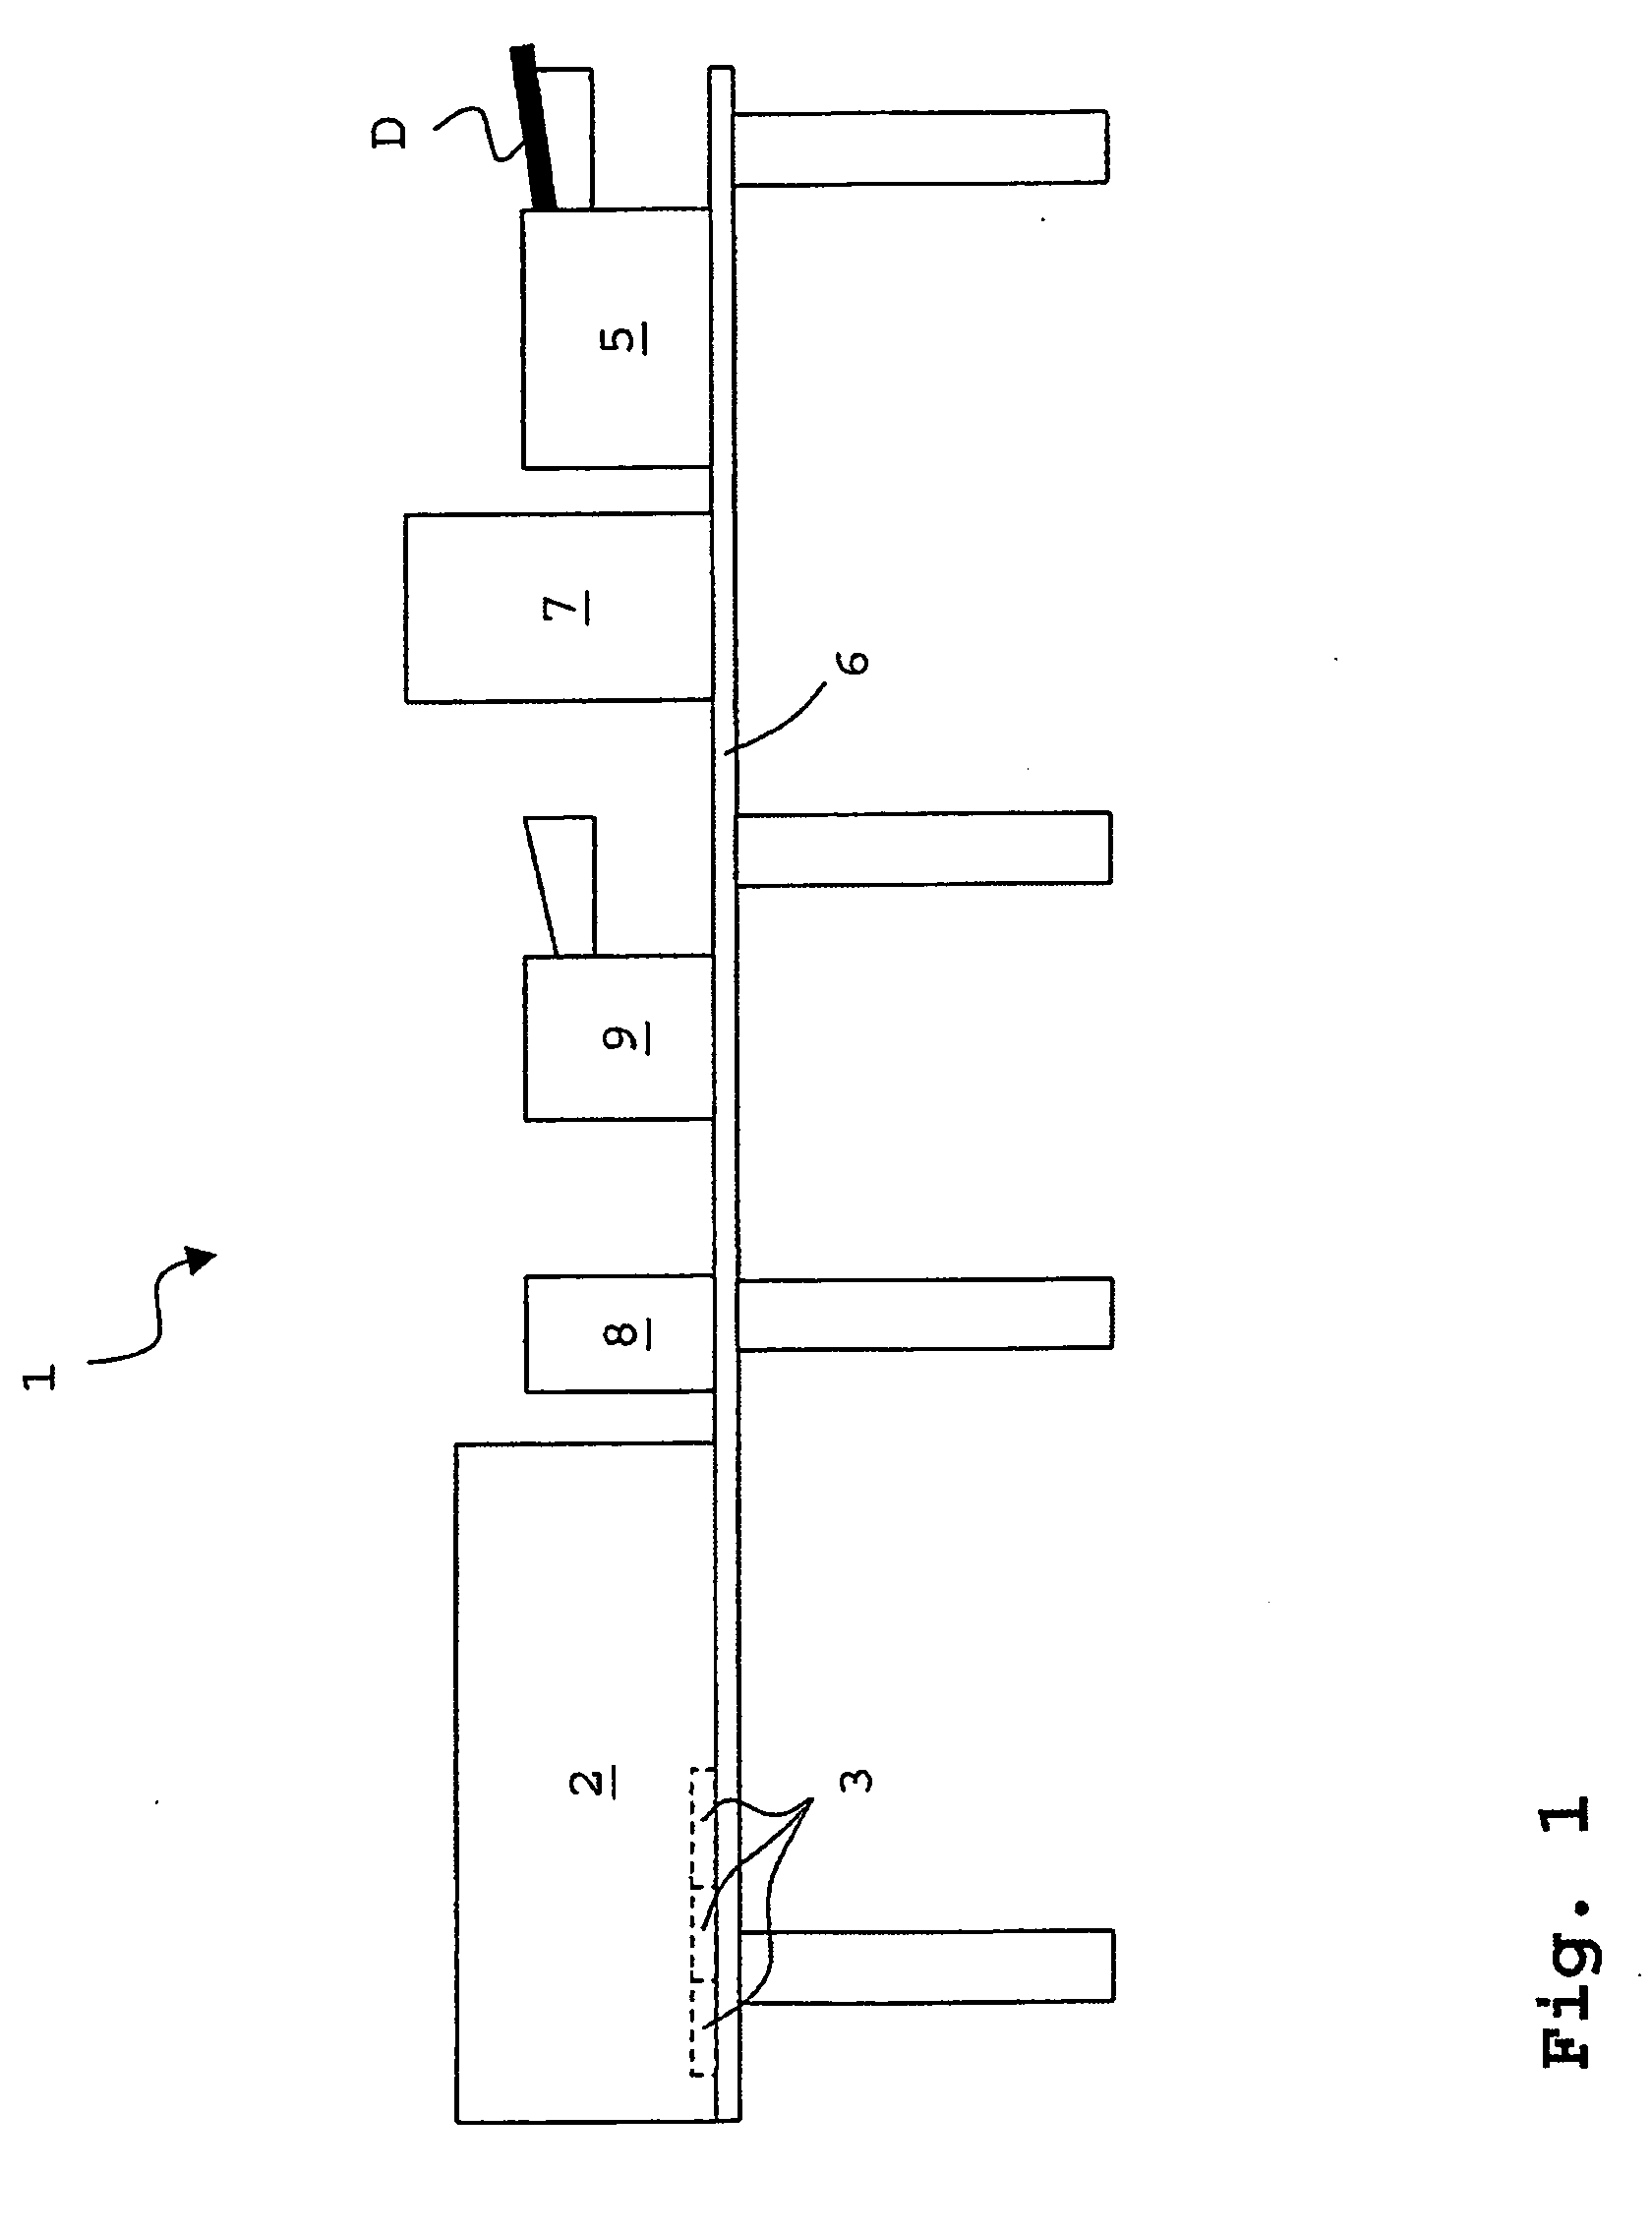 Method and system for printing a document